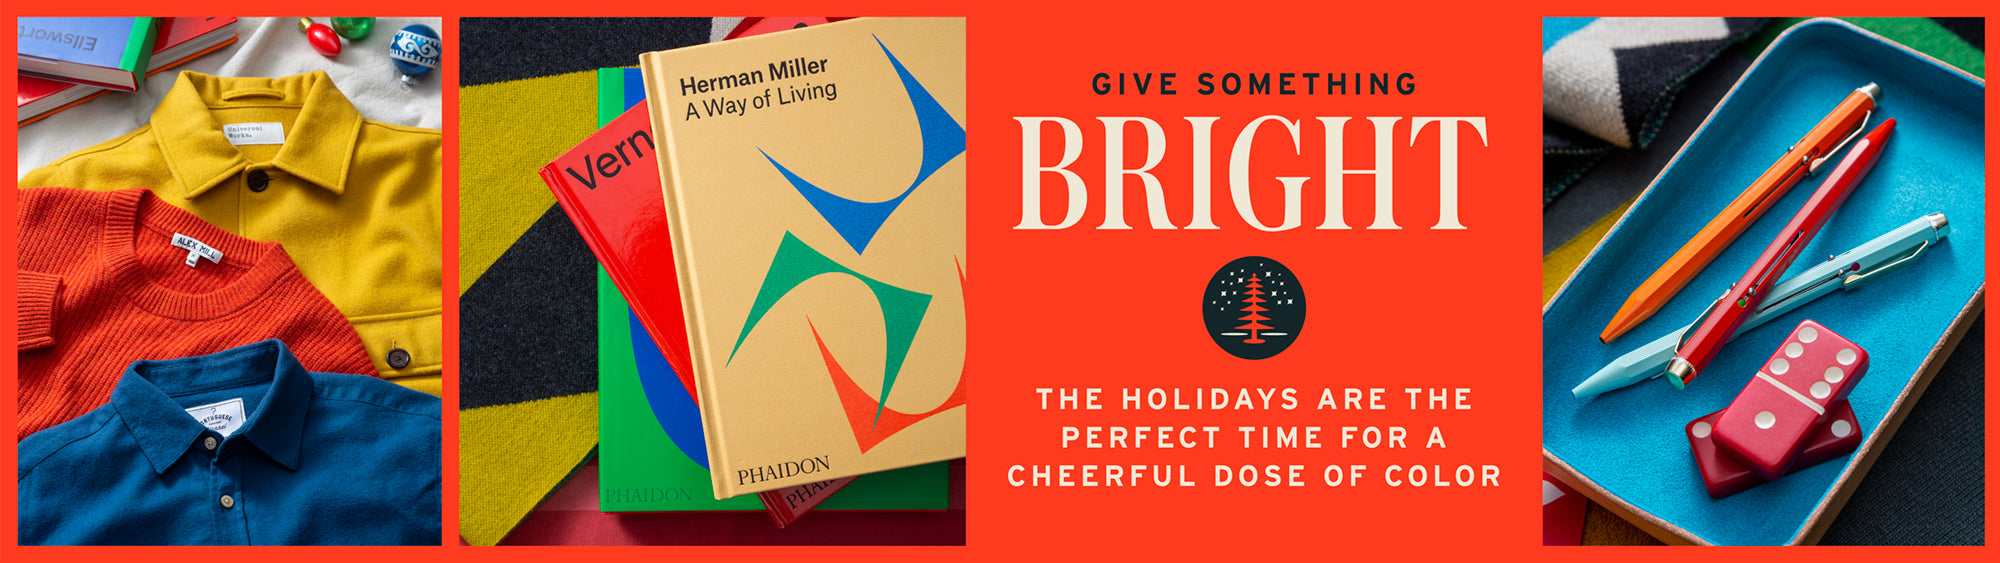 Gift Guide - Give Something Bright | STAG